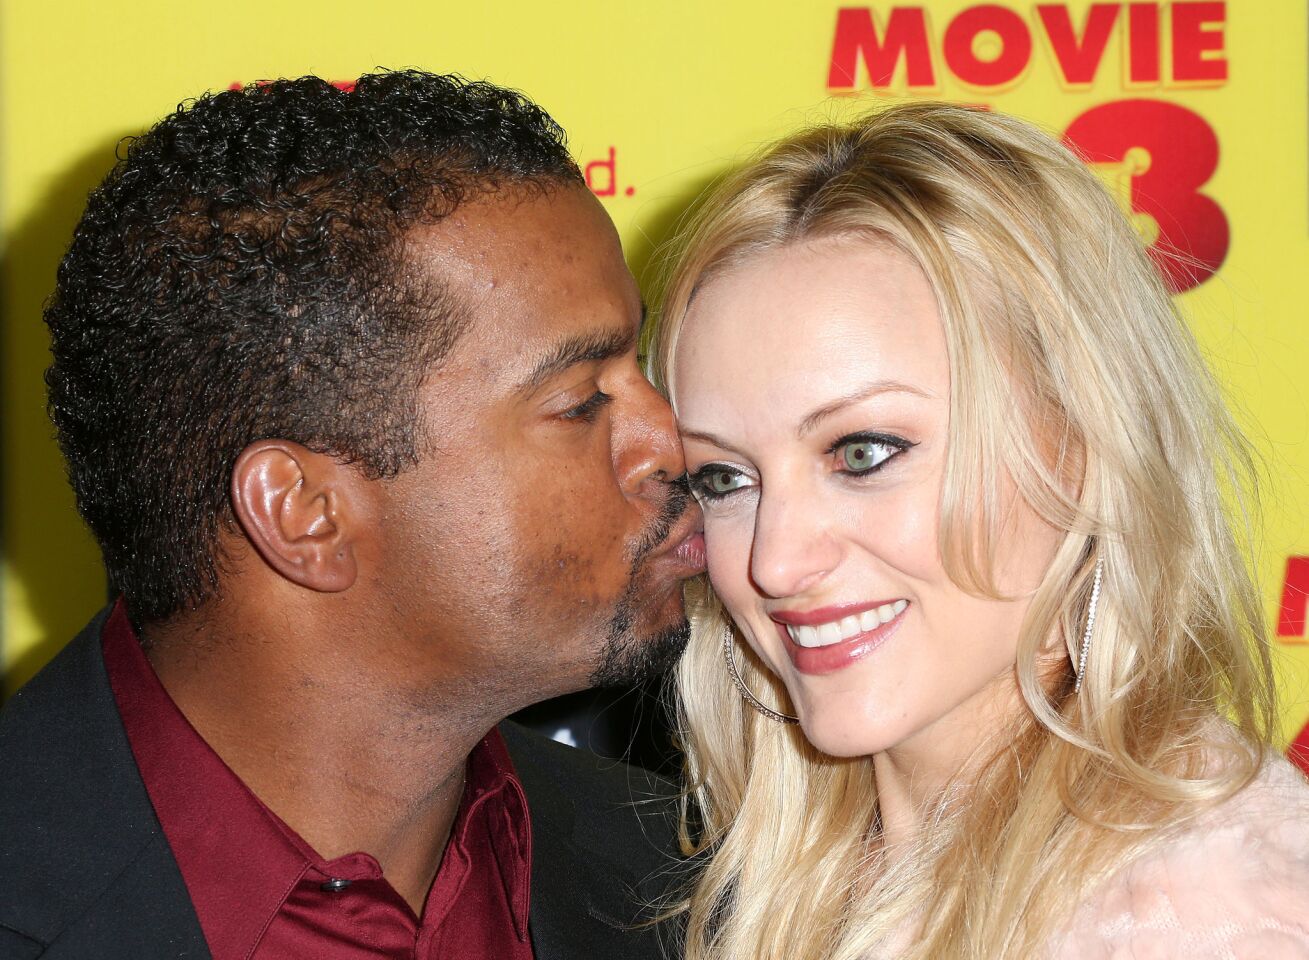 While appearing on "Dancing with the Stars," actor Alfonso Ribeiro announced he and wife Angela Unkrich were expecting their second child together. Now, baby boy Anders Reyn Ribeiro has arrived! The couple tied the knot in October 2012 and welcomed their first baby boy, Alfonso Lincoln, in October 2013.